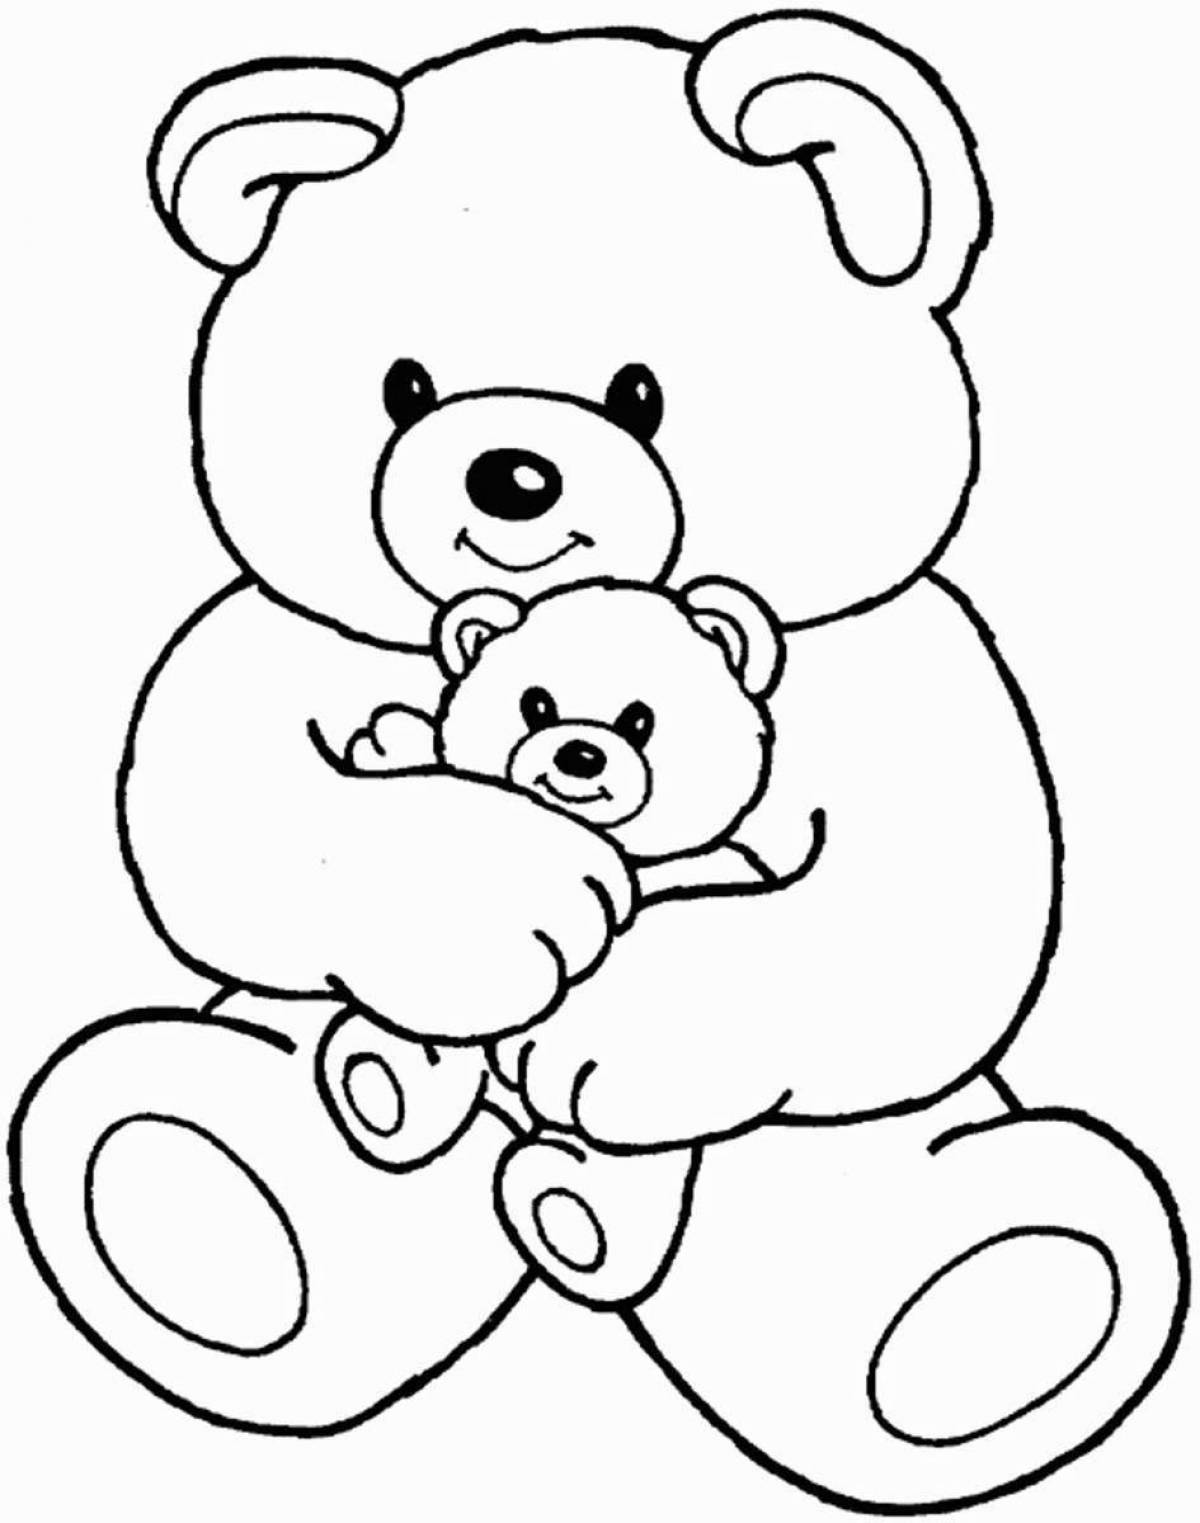 Crazy bear coloring book for 4-5 year olds